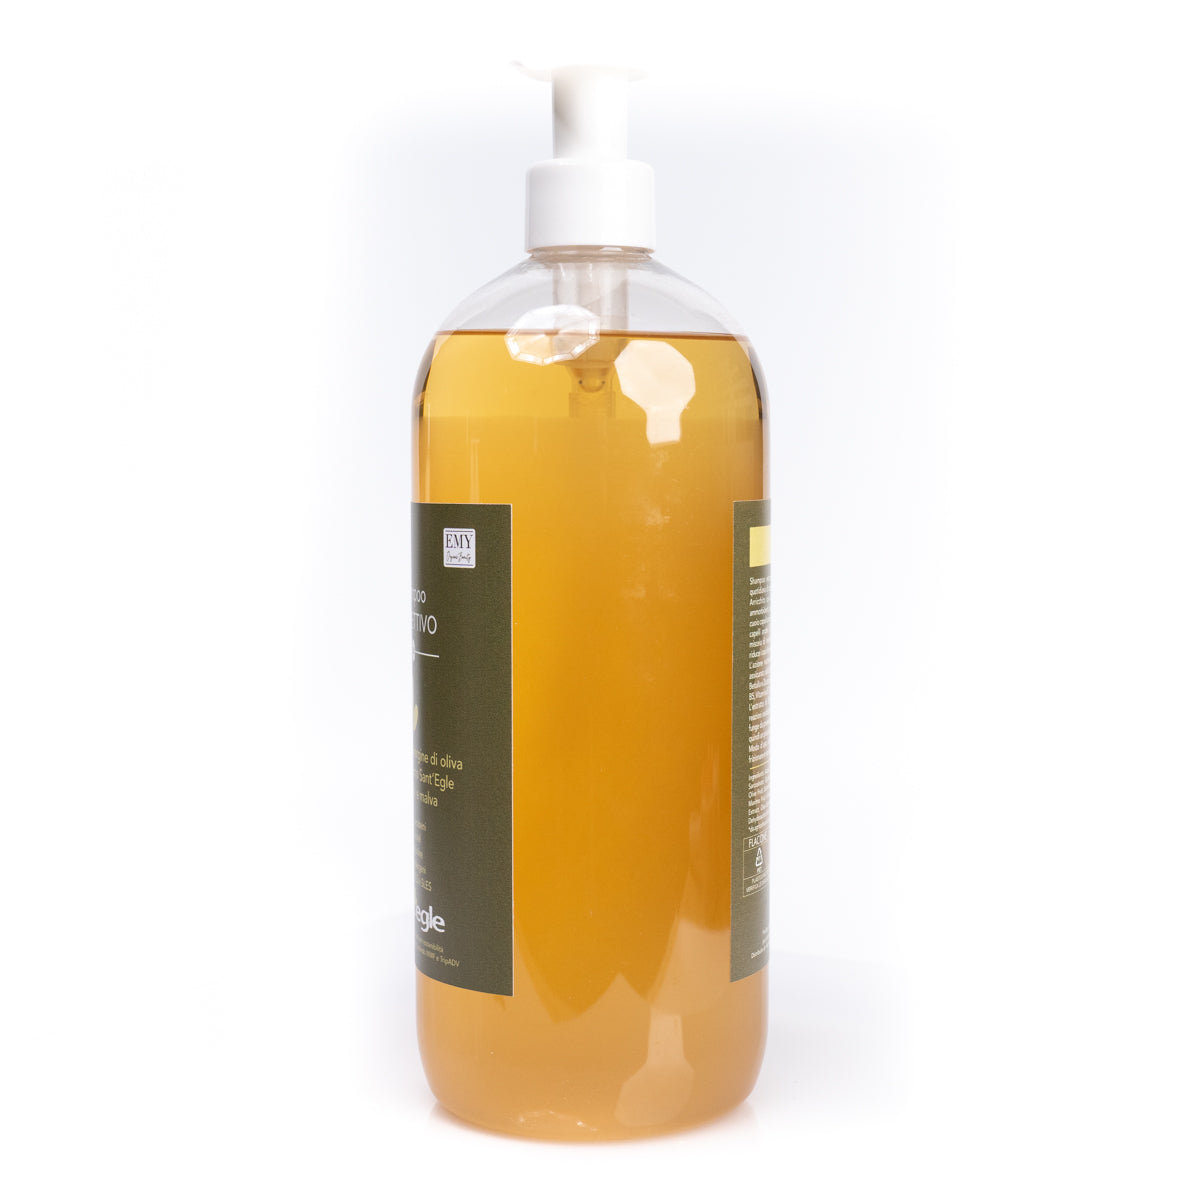 Organic shampoo with extra virgin olive oil, 1L